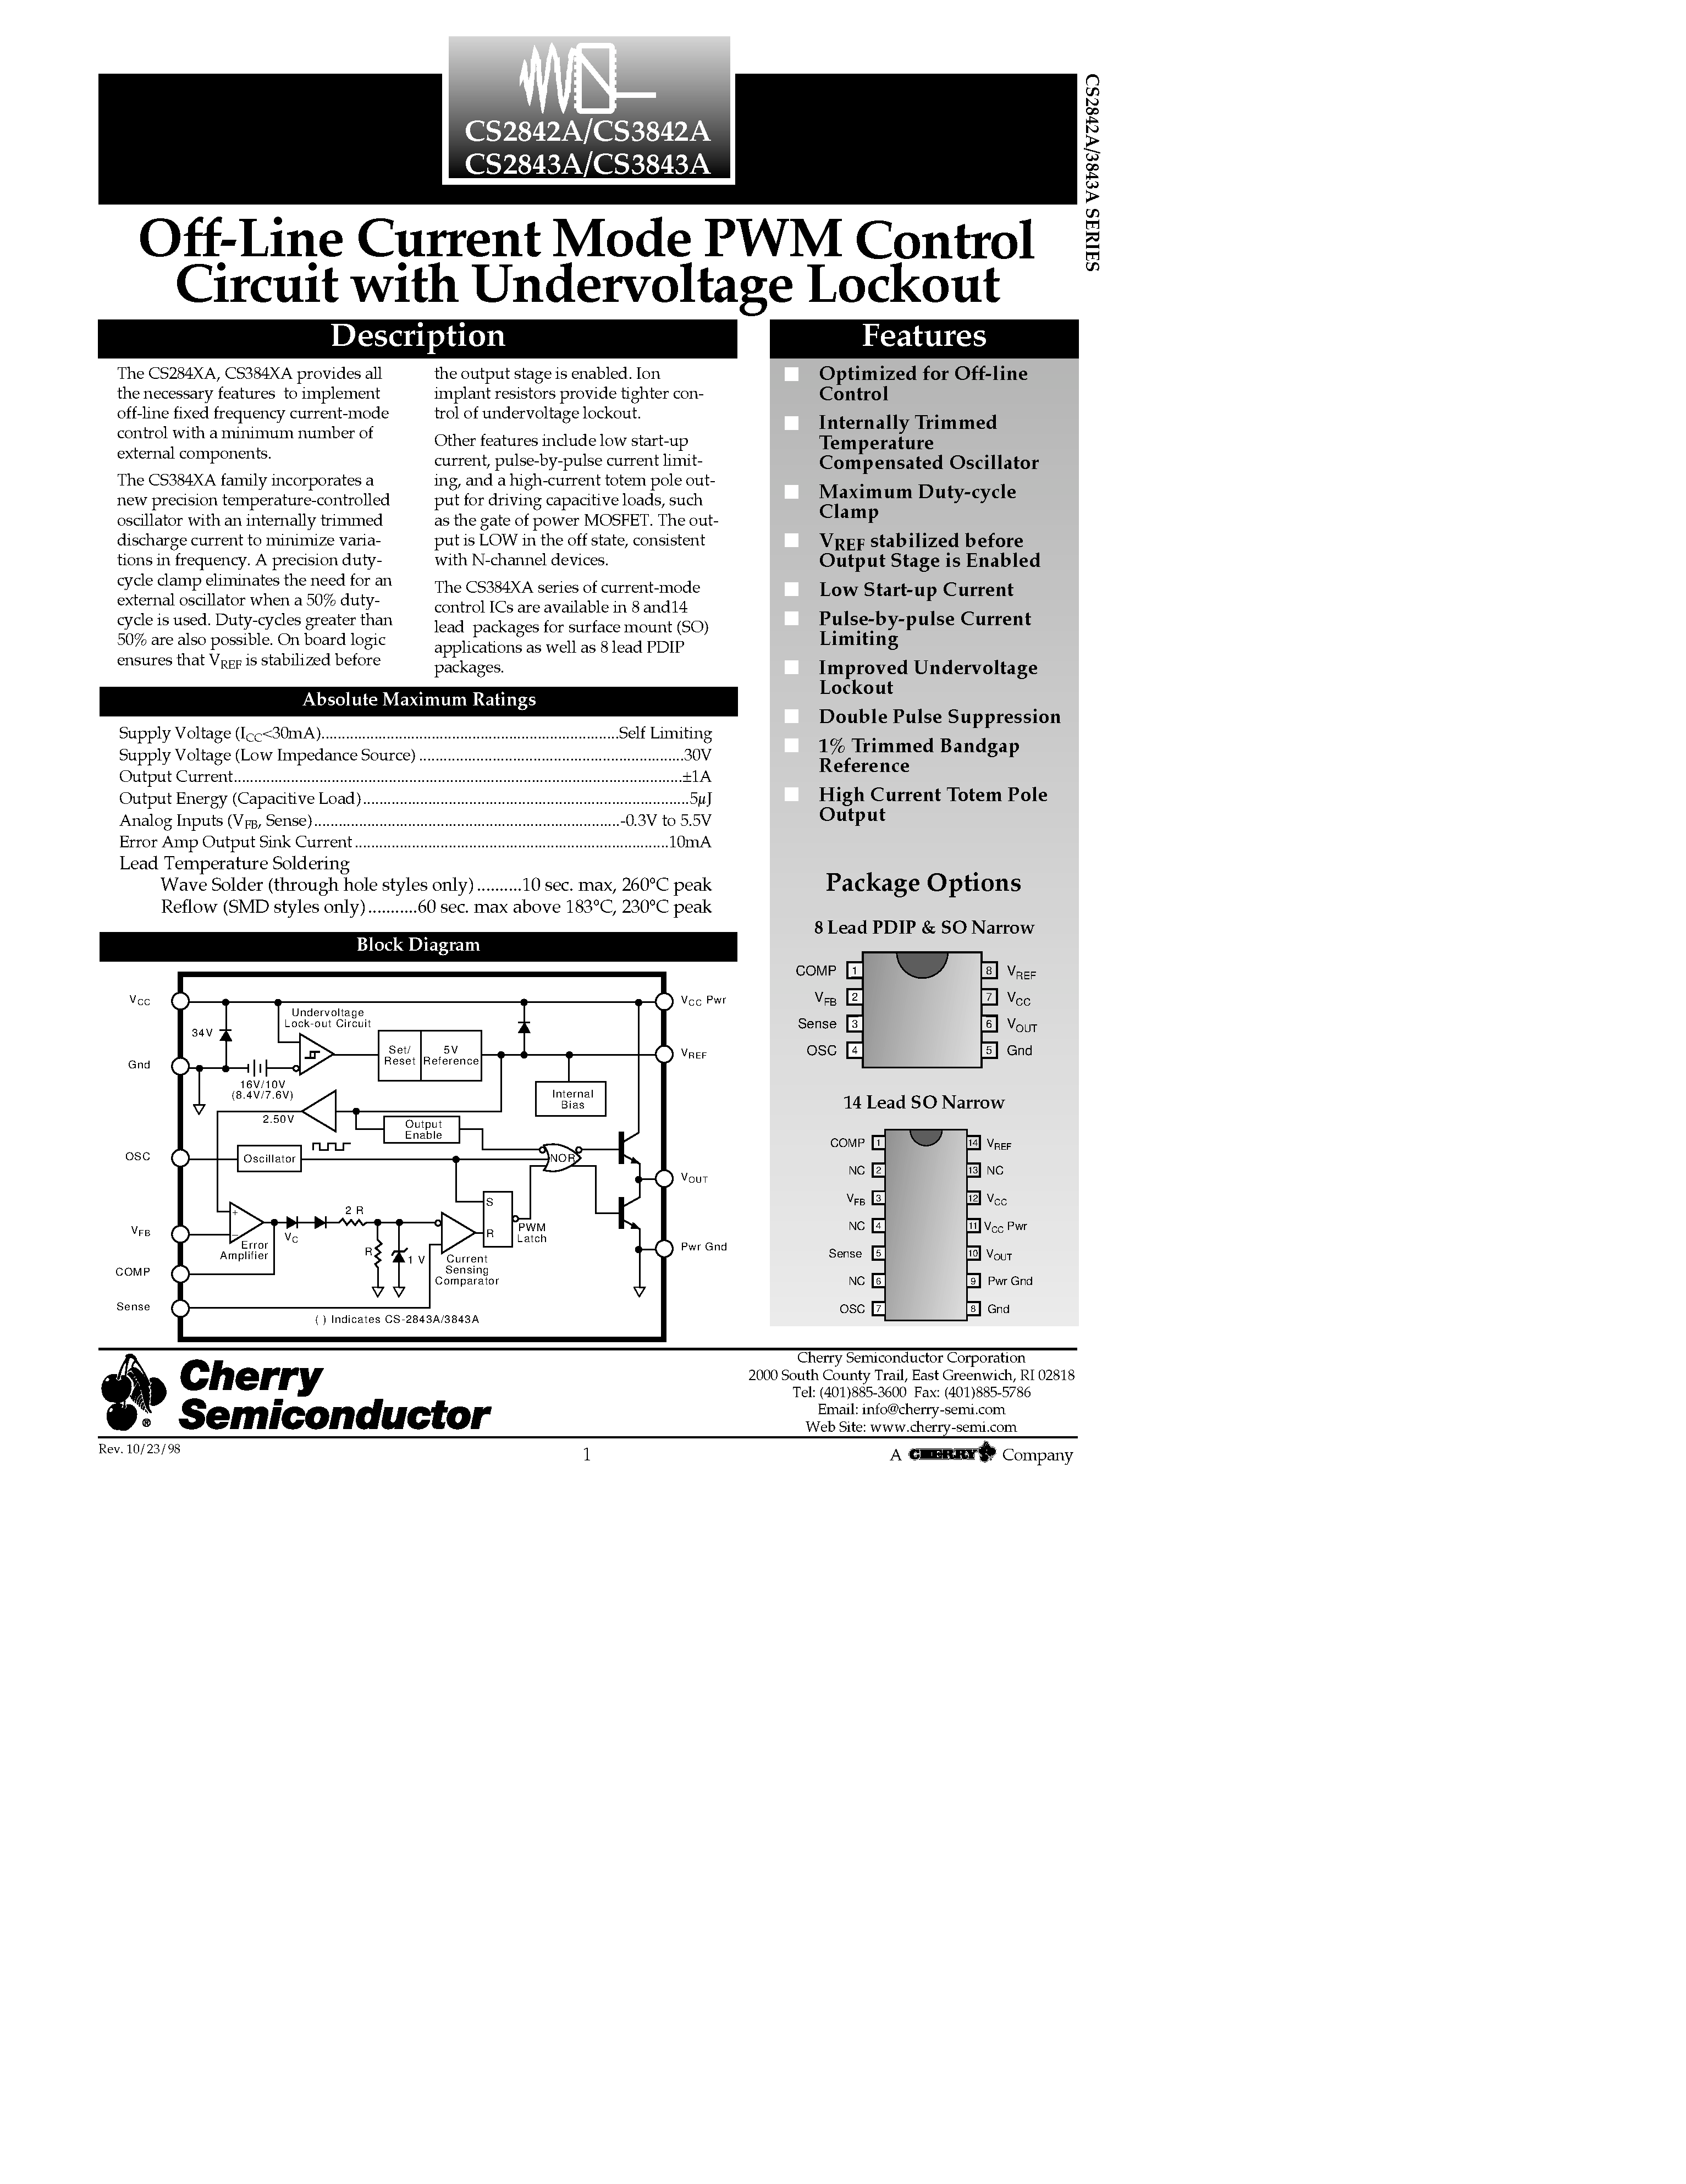 Datasheet CS2843ALD14 - Off-Line Current Mode PWM Control Circuit with Undervoltage Lockout page 1